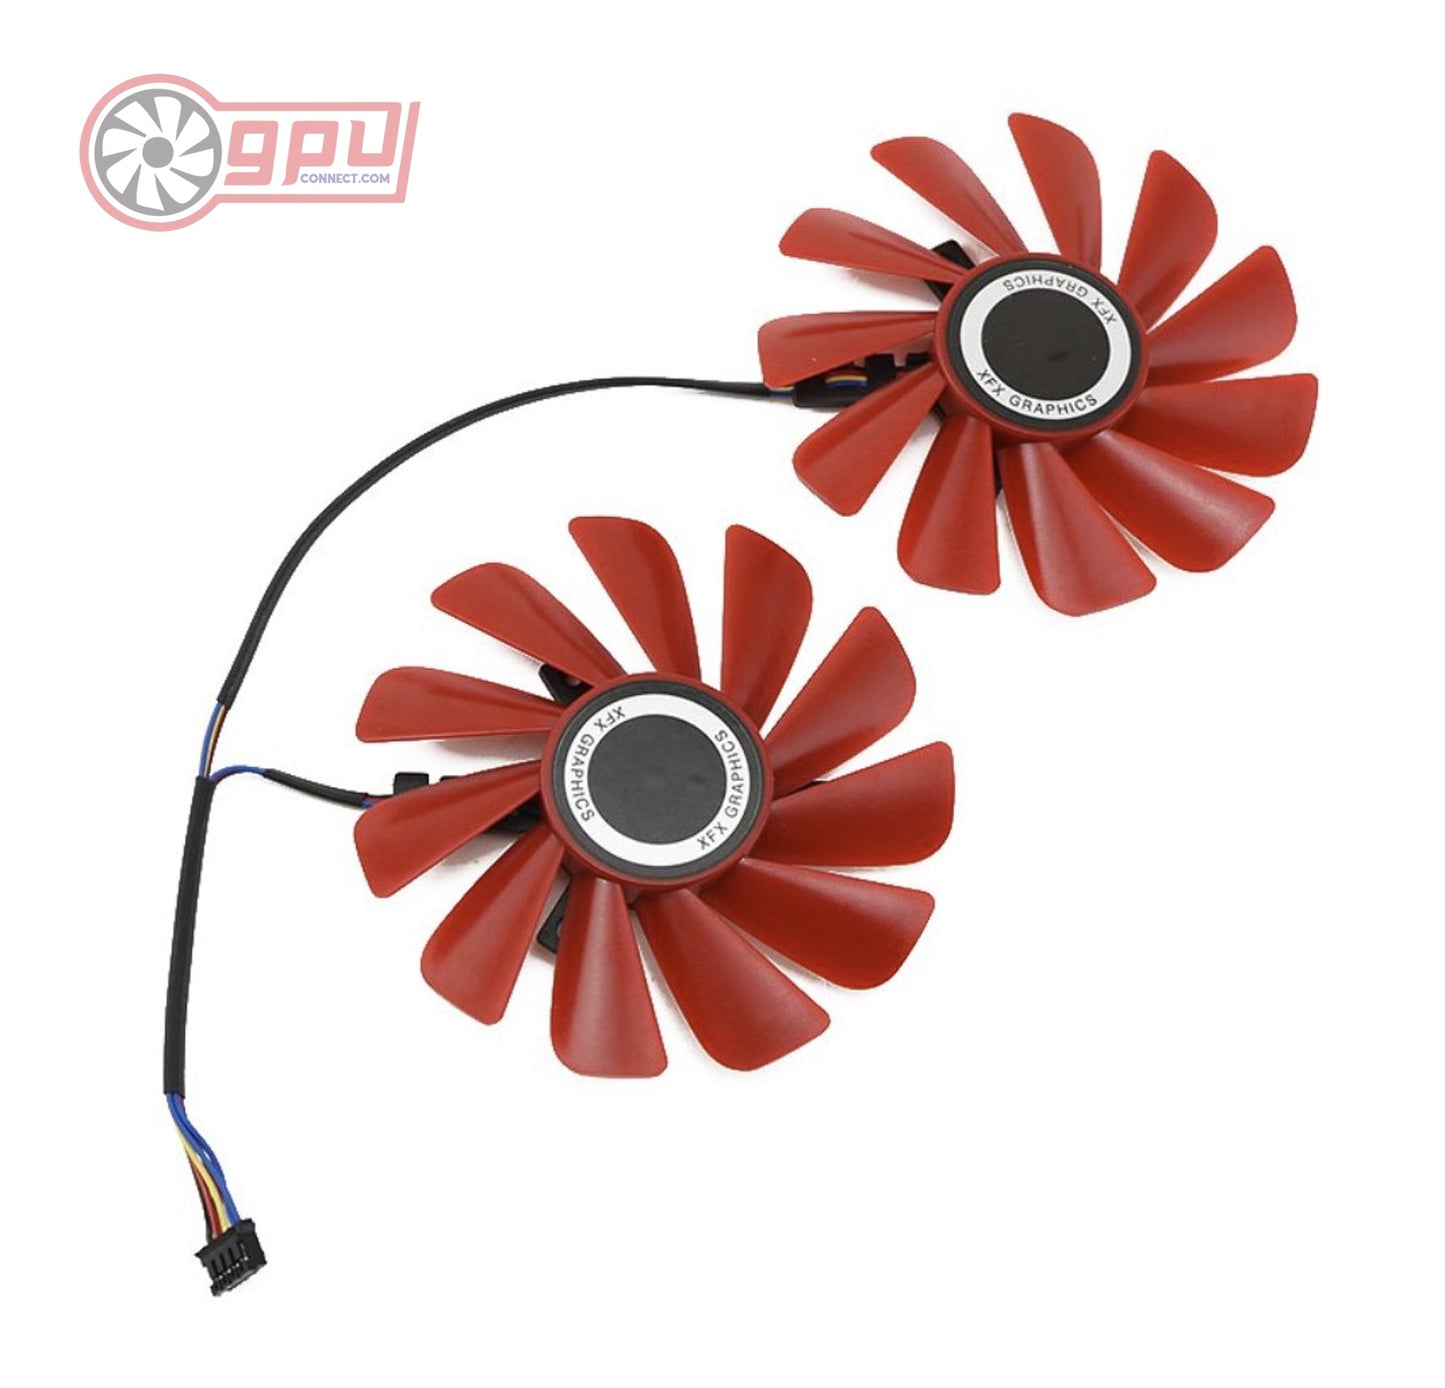 XFX RX 570 580 Replacement Graphics Card Fan Set - Red - GPUCONNECT.COM